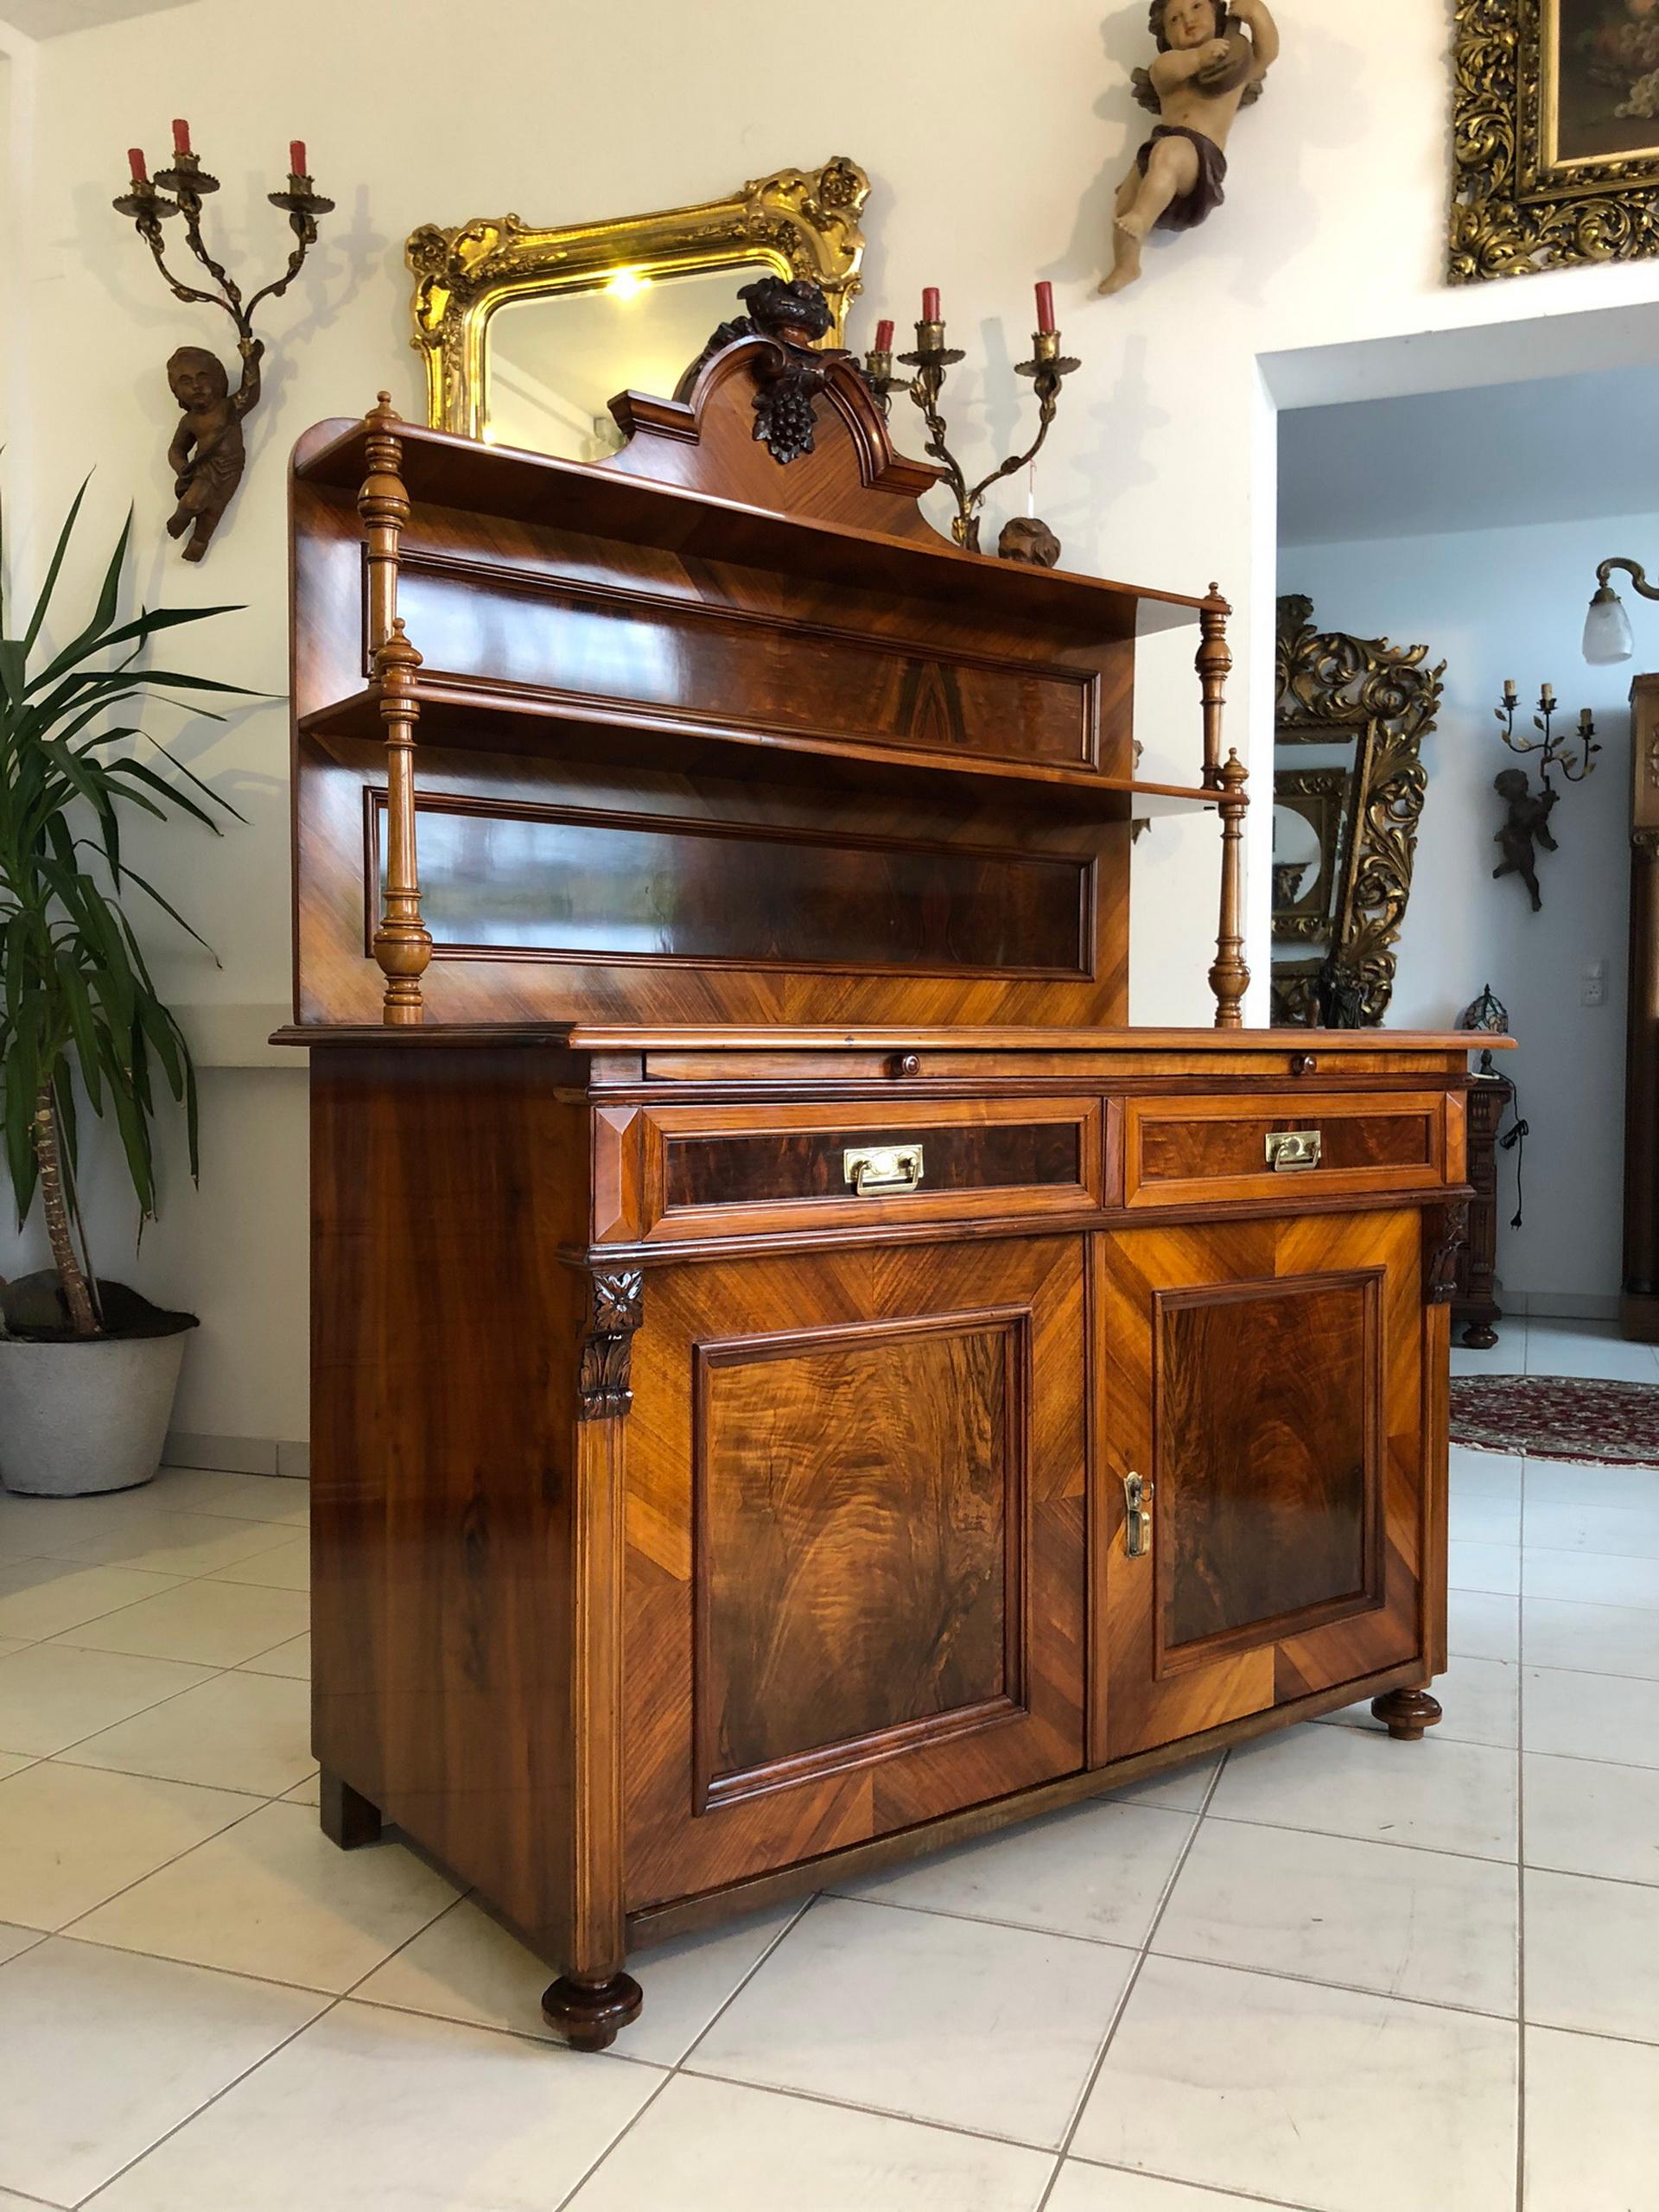 Antique historicism buffet from the late 19th century. Made out of walnut wood with a stunning warm brown veneer, this luxurious piece of furniture convinces with its compact measurements, yet plenty of closed and open storage space, as well as the